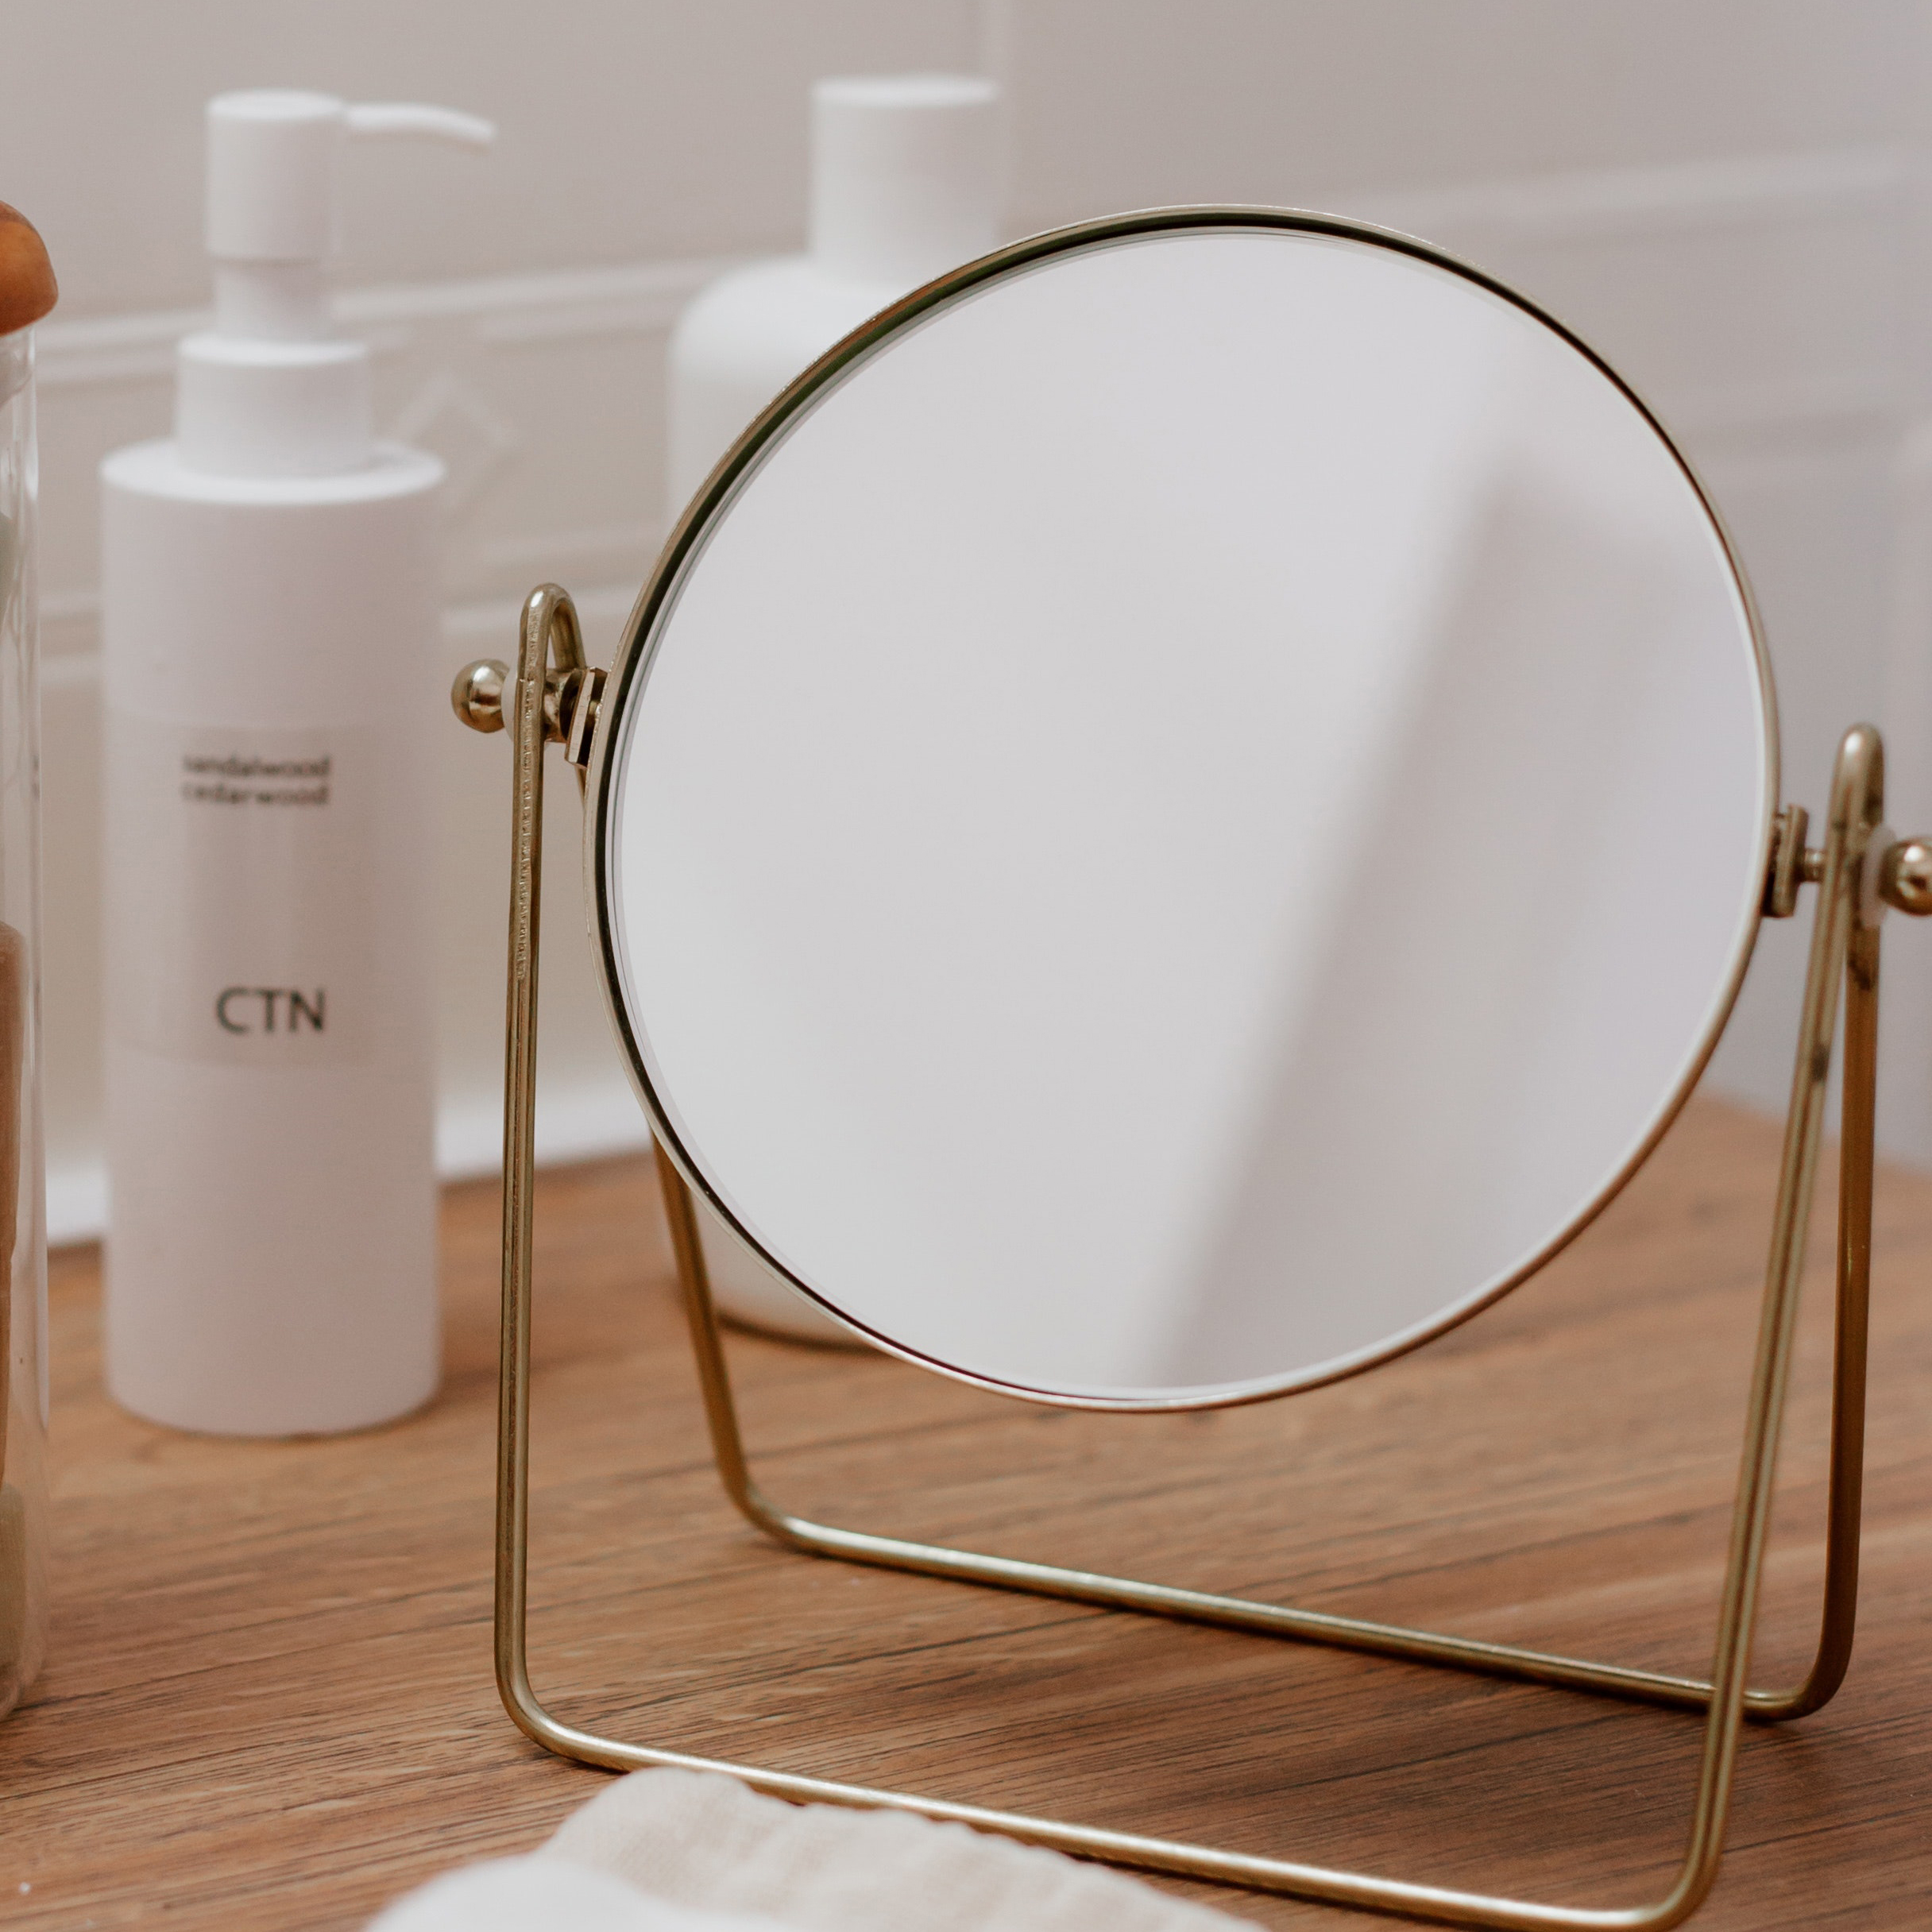 What kind of makeup mirror do you need?